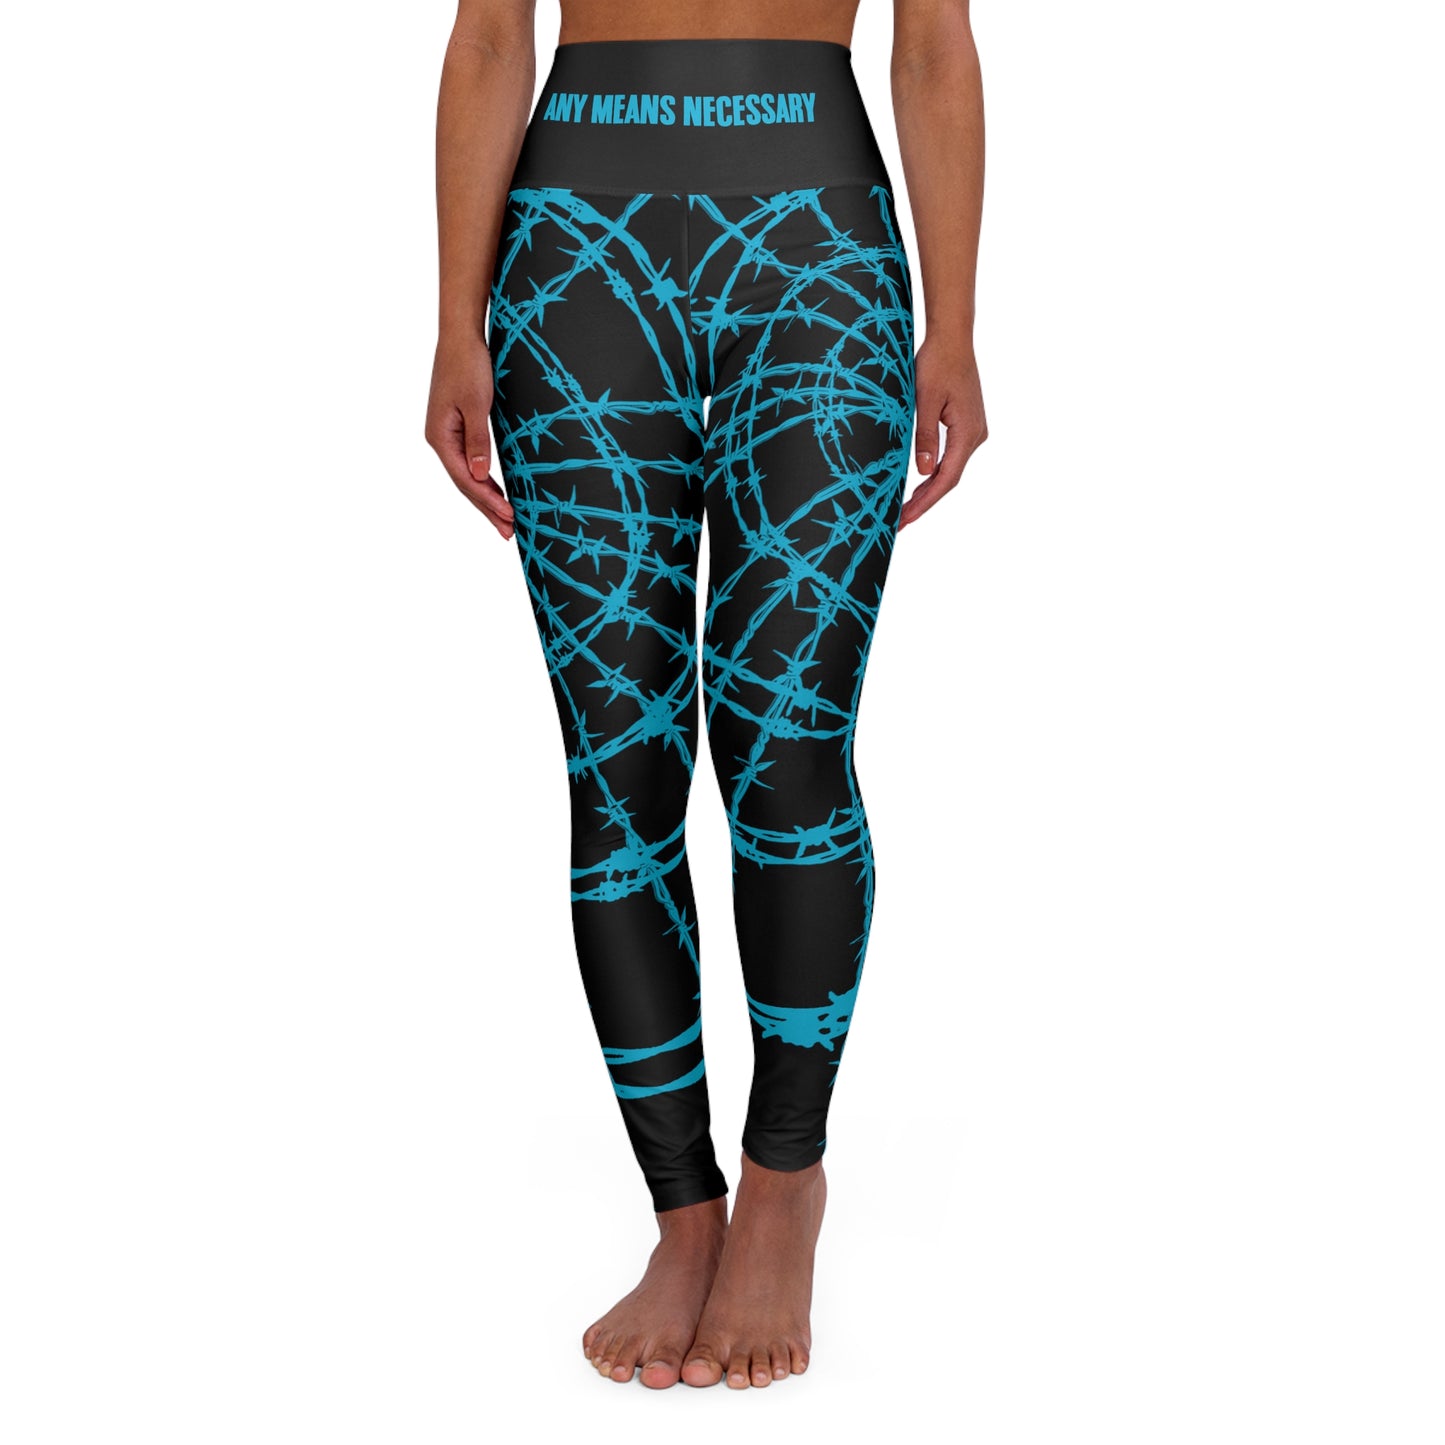 any means necessary shawn coss arachnid high waisted leggings front